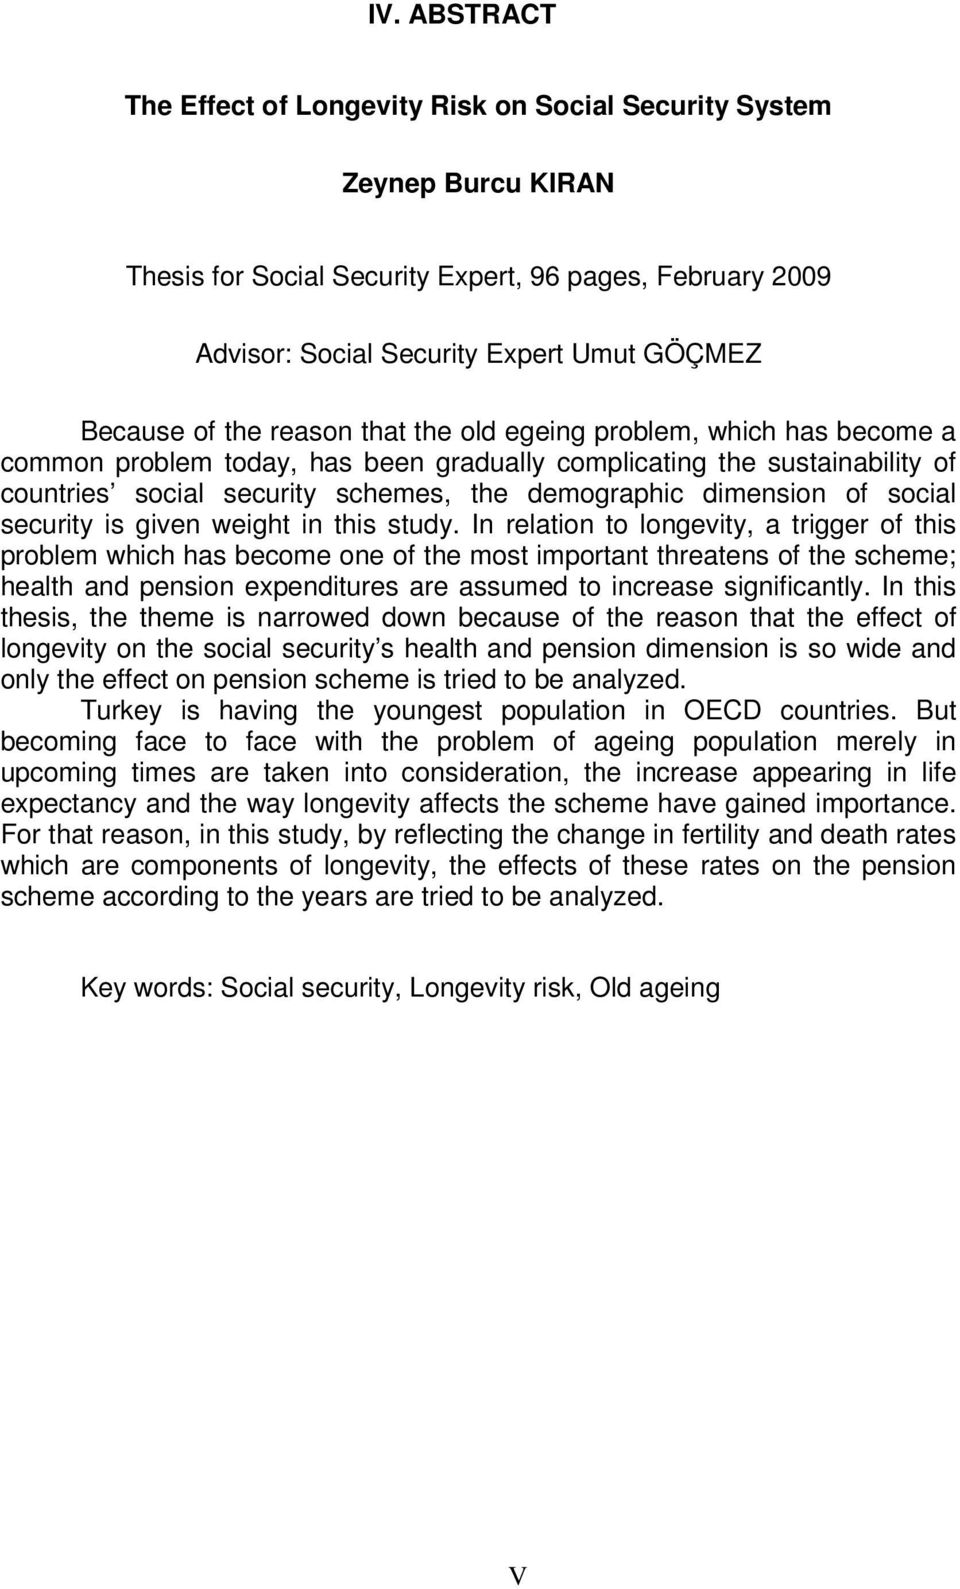 of social security is given weight in this study.